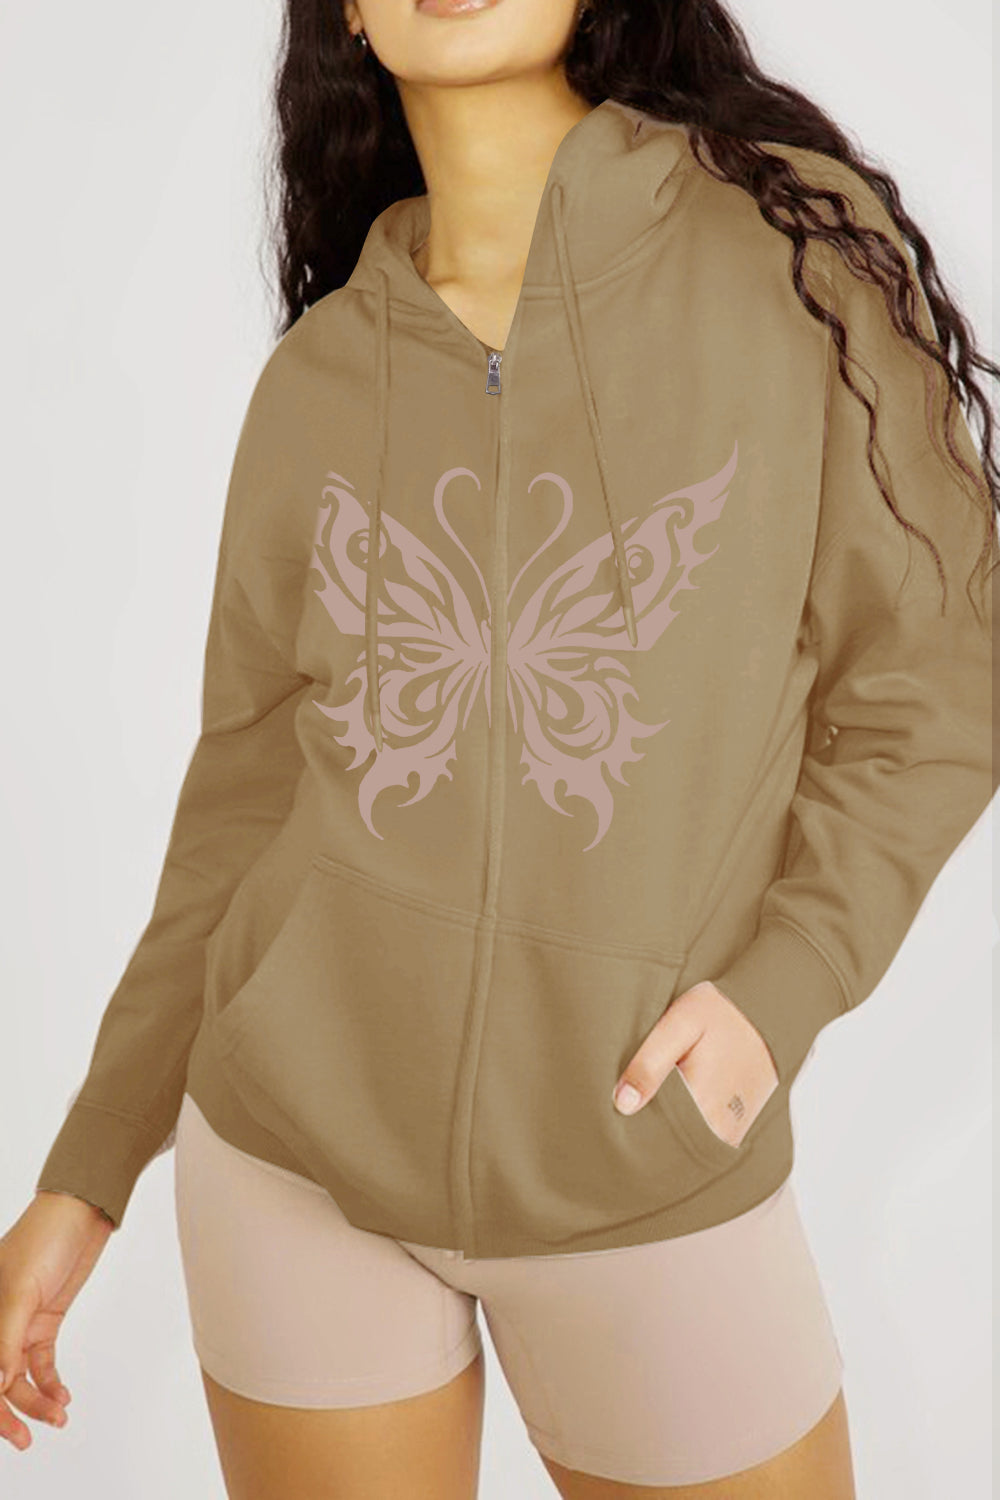 Simply Love Full Size Graphic Hoodies Taupe / S Simply Love Full Size Butterfly Graphic Hoodie